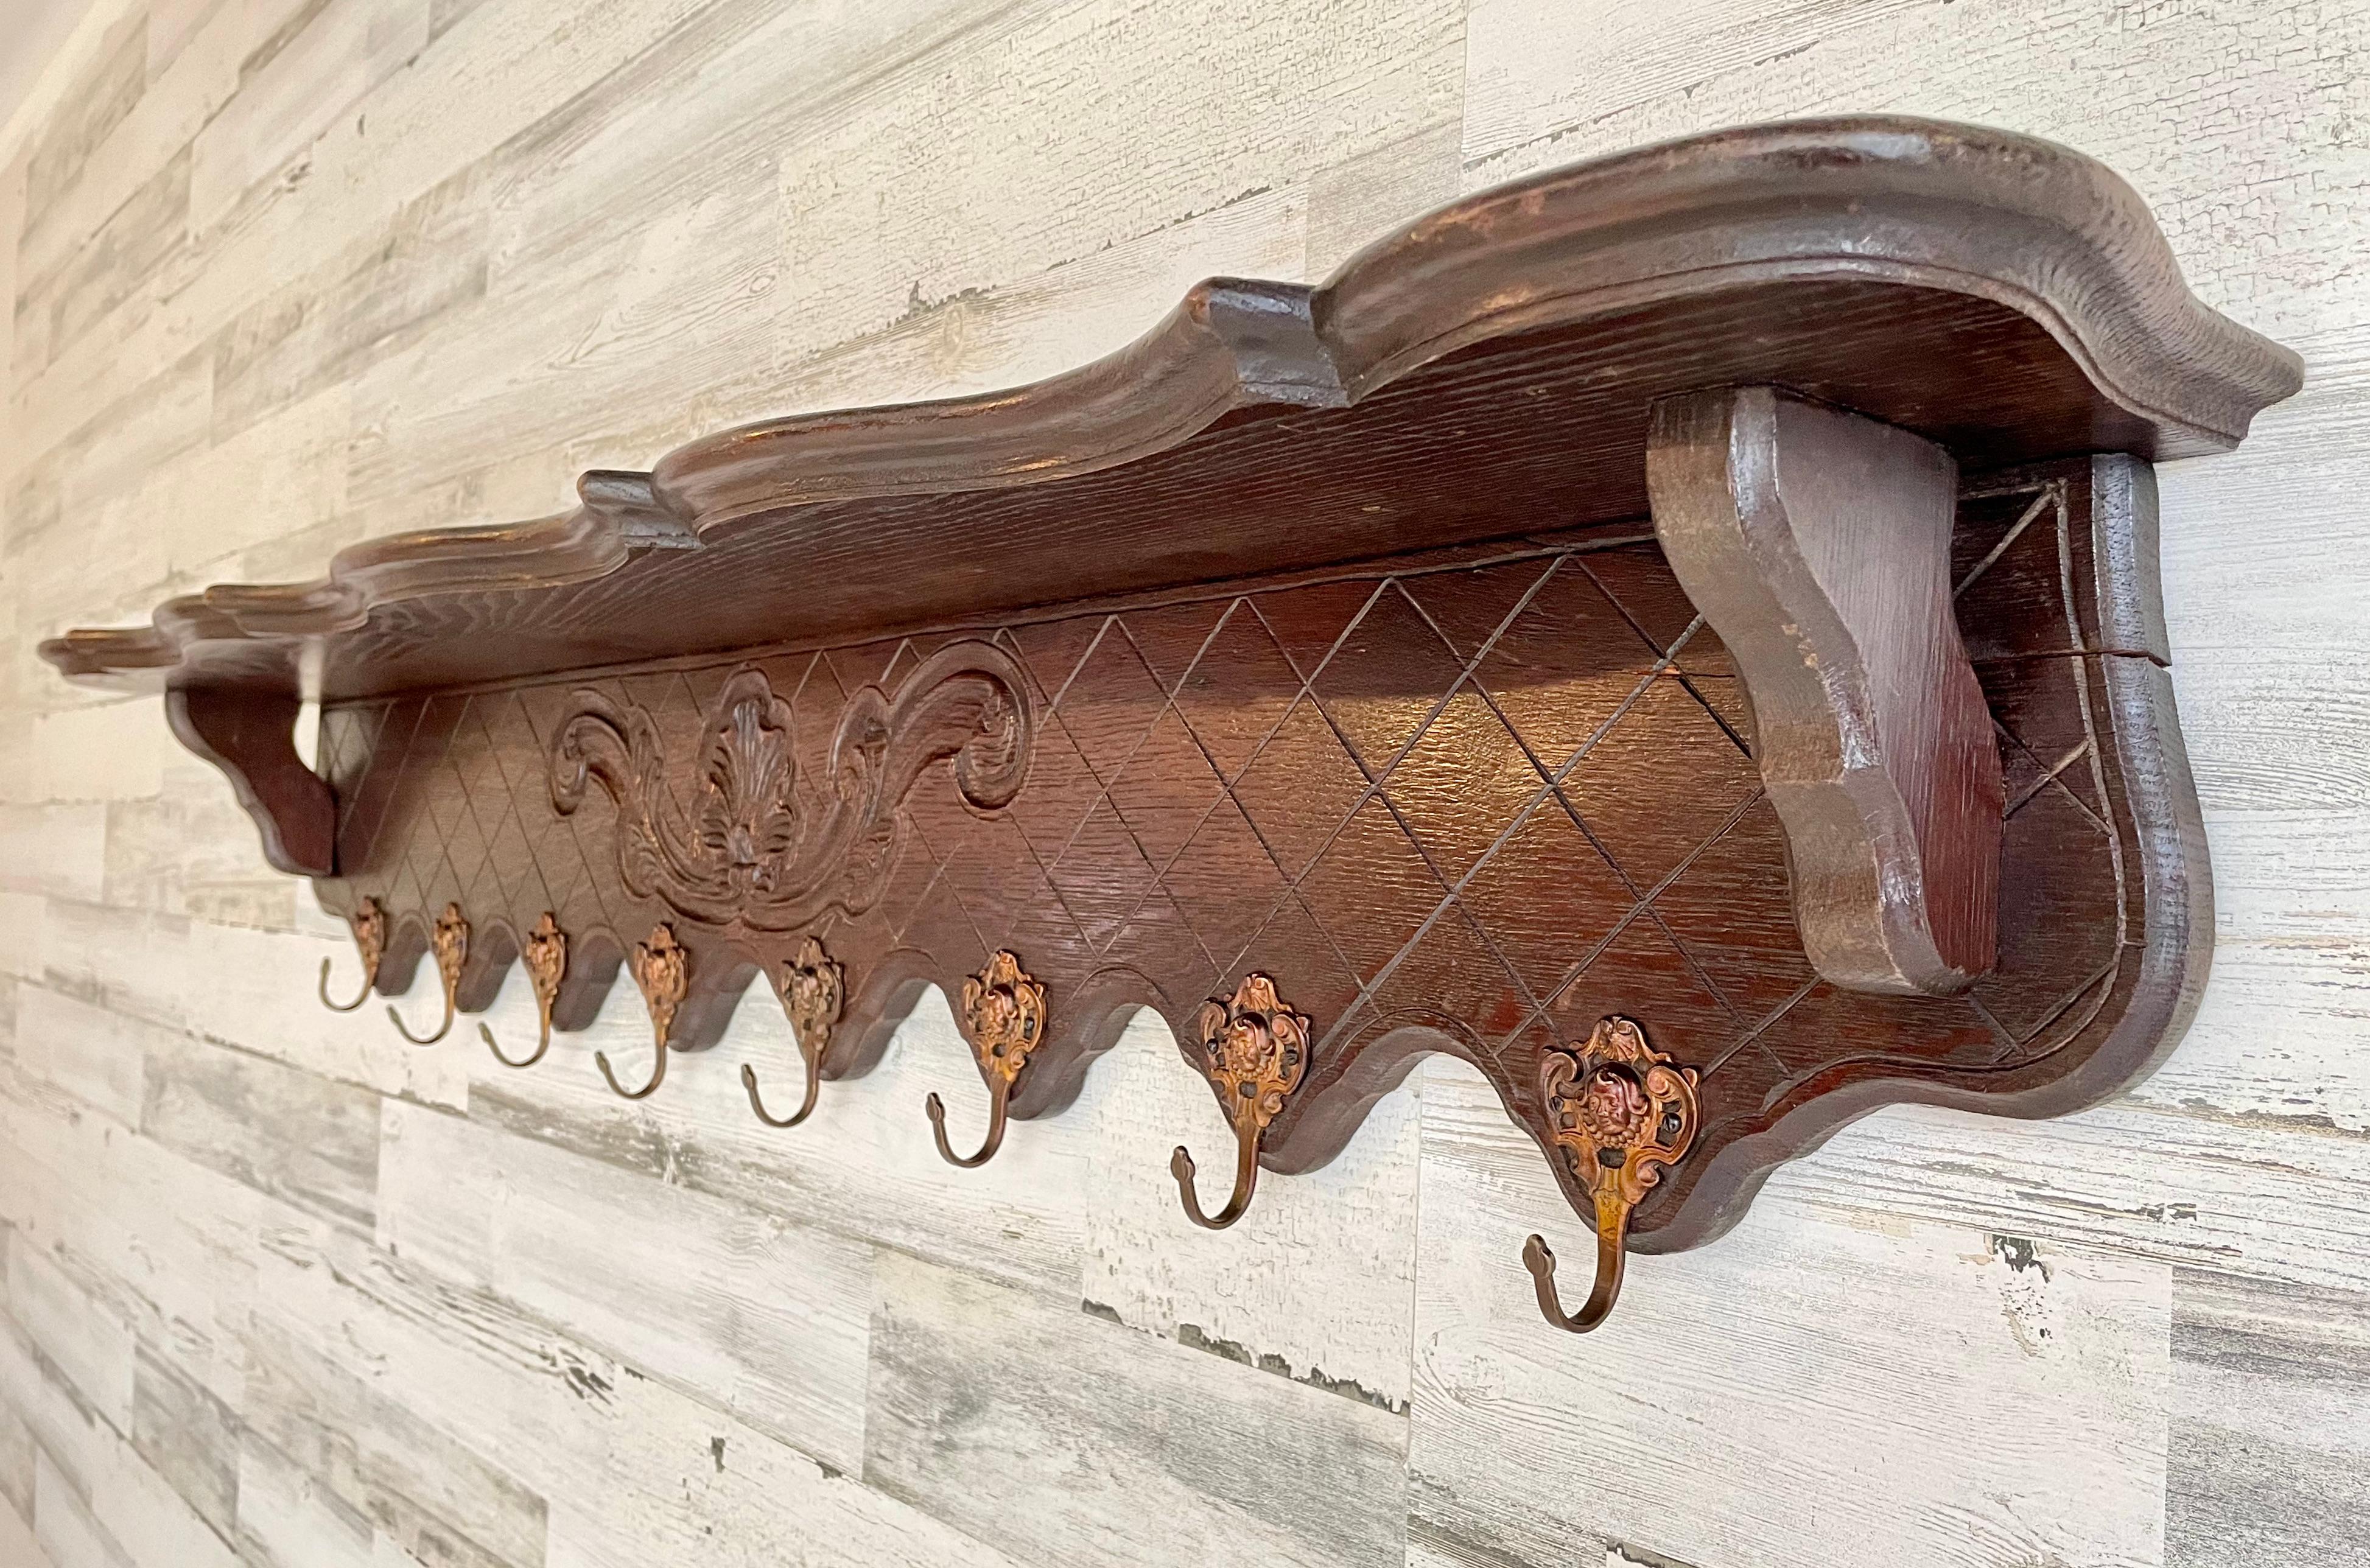 French antique étagère casserole / coat rack. Solid oak with decorative Louis XIV embossed brass hooks for pots, pans, or coats. The top includes a plate groove for display.